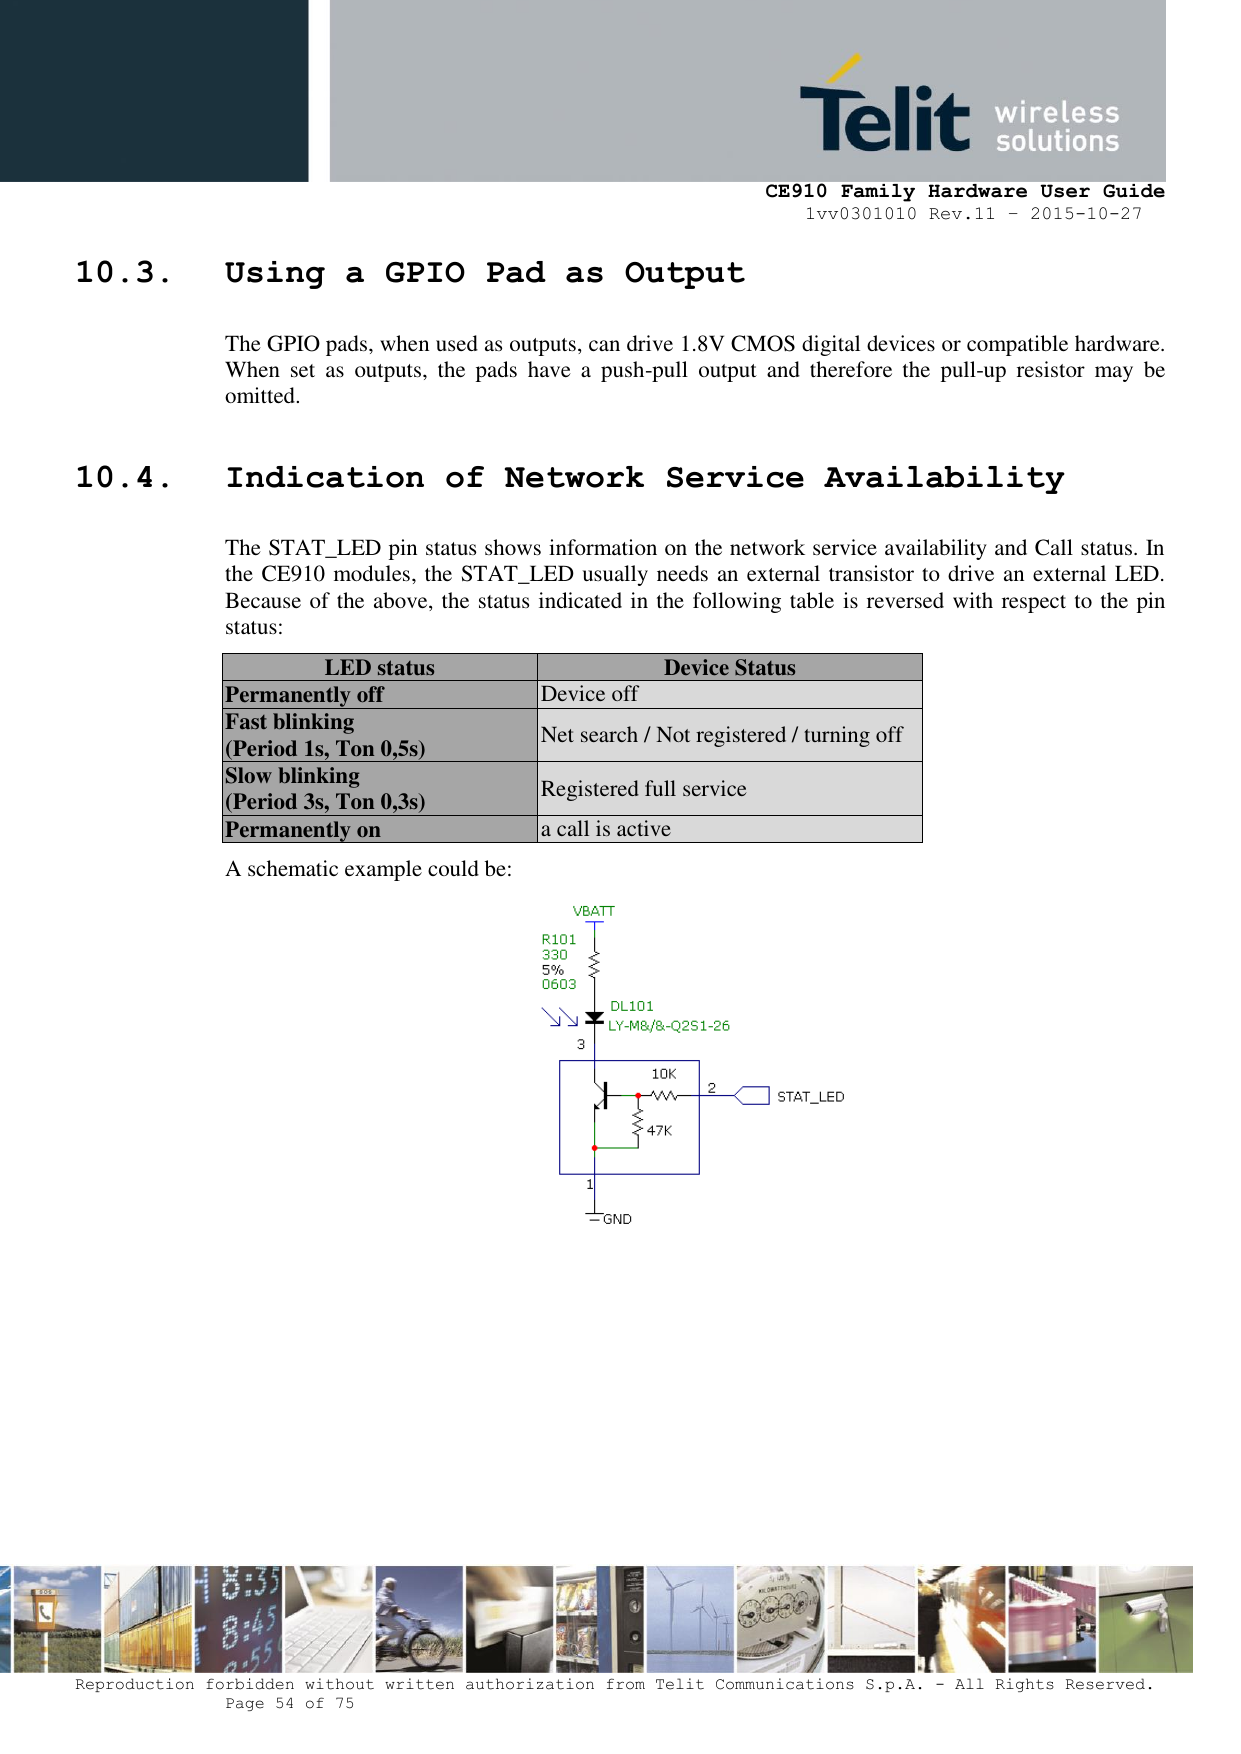     CE910 Family Hardware User Guide 1vv0301010 Rev.11 – 2015-10-27 Reproduction forbidden without written authorization from Telit Communications S.p.A. - All Rights Reserved.    Page 54 of 75                                                     10.3. Using a GPIO Pad as Output The GPIO pads, when used as outputs, can drive 1.8V CMOS digital devices or compatible hardware. When  set  as  outputs,  the  pads  have  a  push-pull  output  and  therefore  the  pull-up  resistor  may  be omitted. 10.4. Indication of Network Service Availability The STAT_LED pin status shows information on the network service availability and Call status. In the CE910 modules, the STAT_LED usually needs an external transistor to drive an external LED. Because of the above, the status indicated in the following table is reversed with respect to the pin status: LED status Device Status Permanently off Device off Fast blinking (Period 1s, Ton 0,5s) Net search / Not registered / turning off Slow blinking (Period 3s, Ton 0,3s) Registered full service Permanently on a call is active A schematic example could be:         